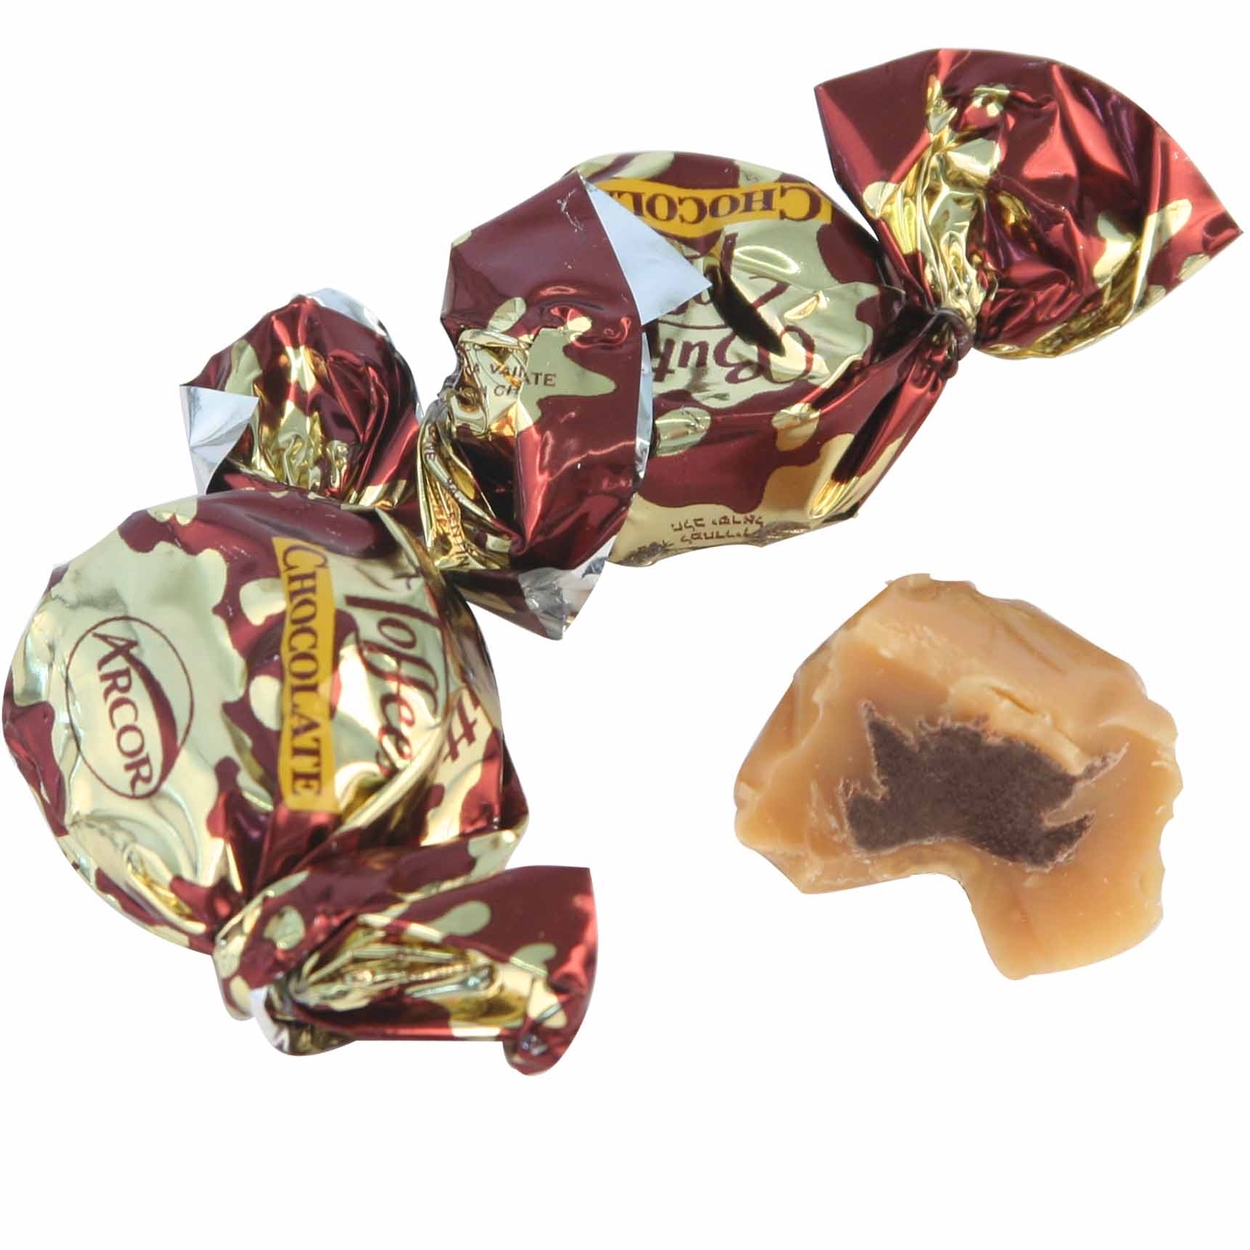 butter chocolate candy